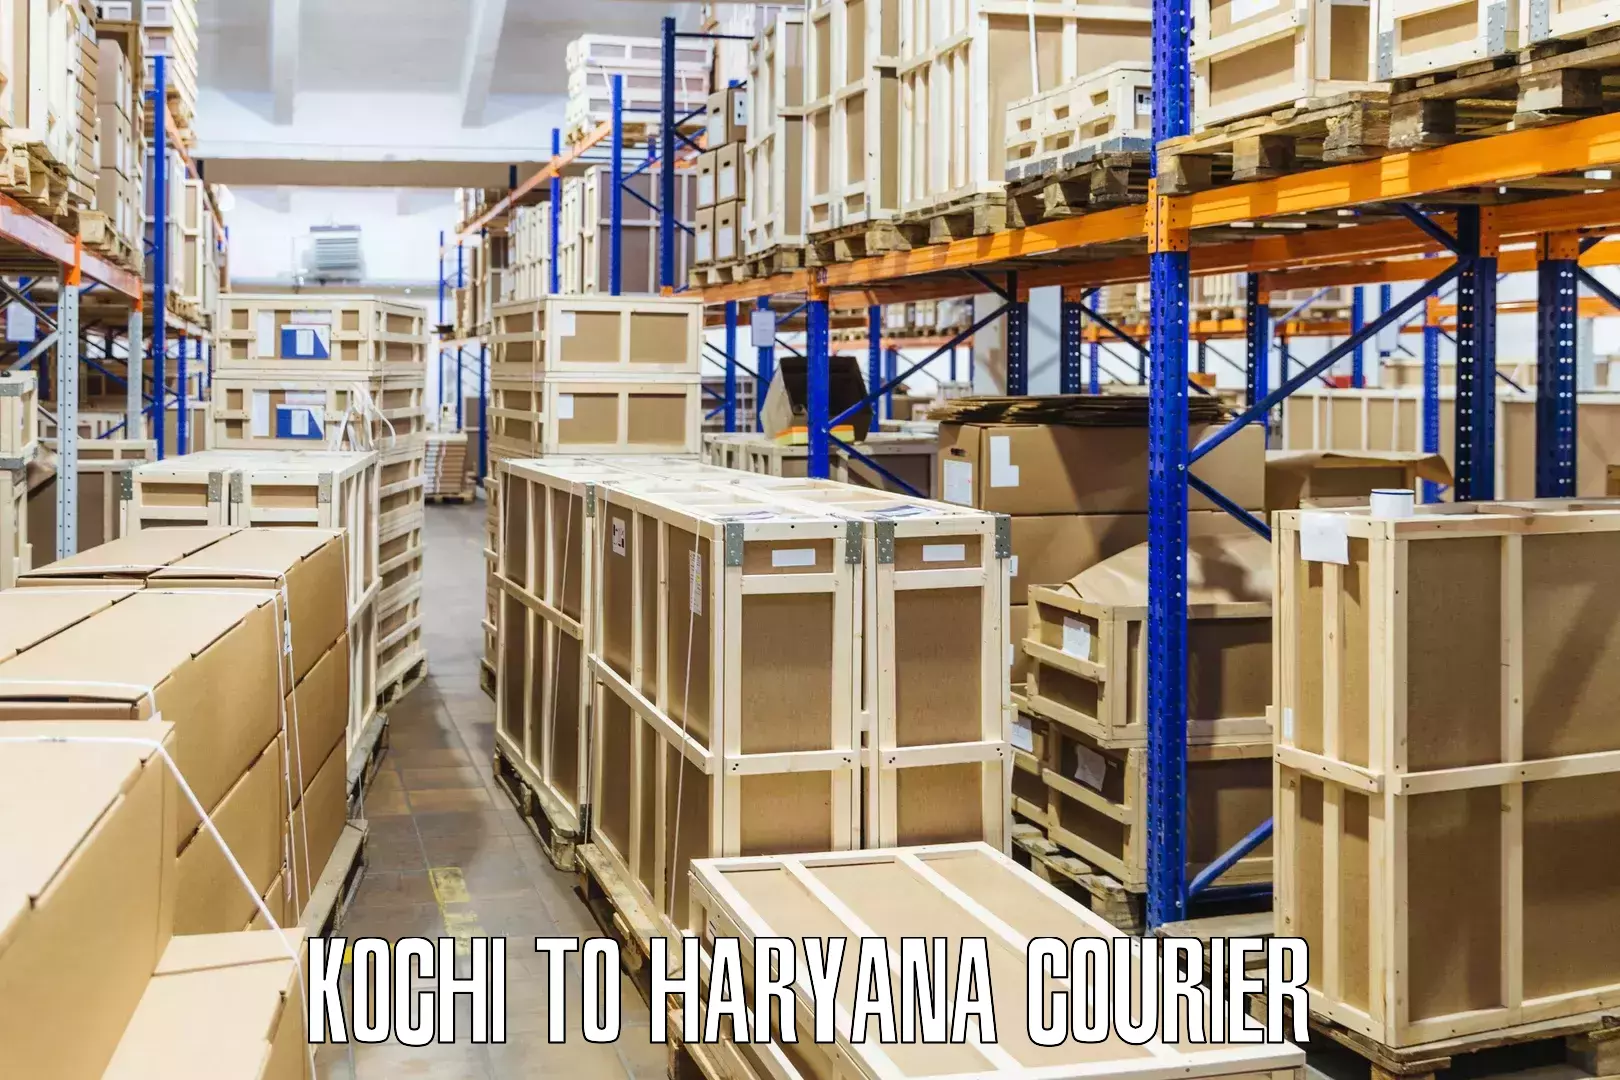 Global courier networks Kochi to Chirya